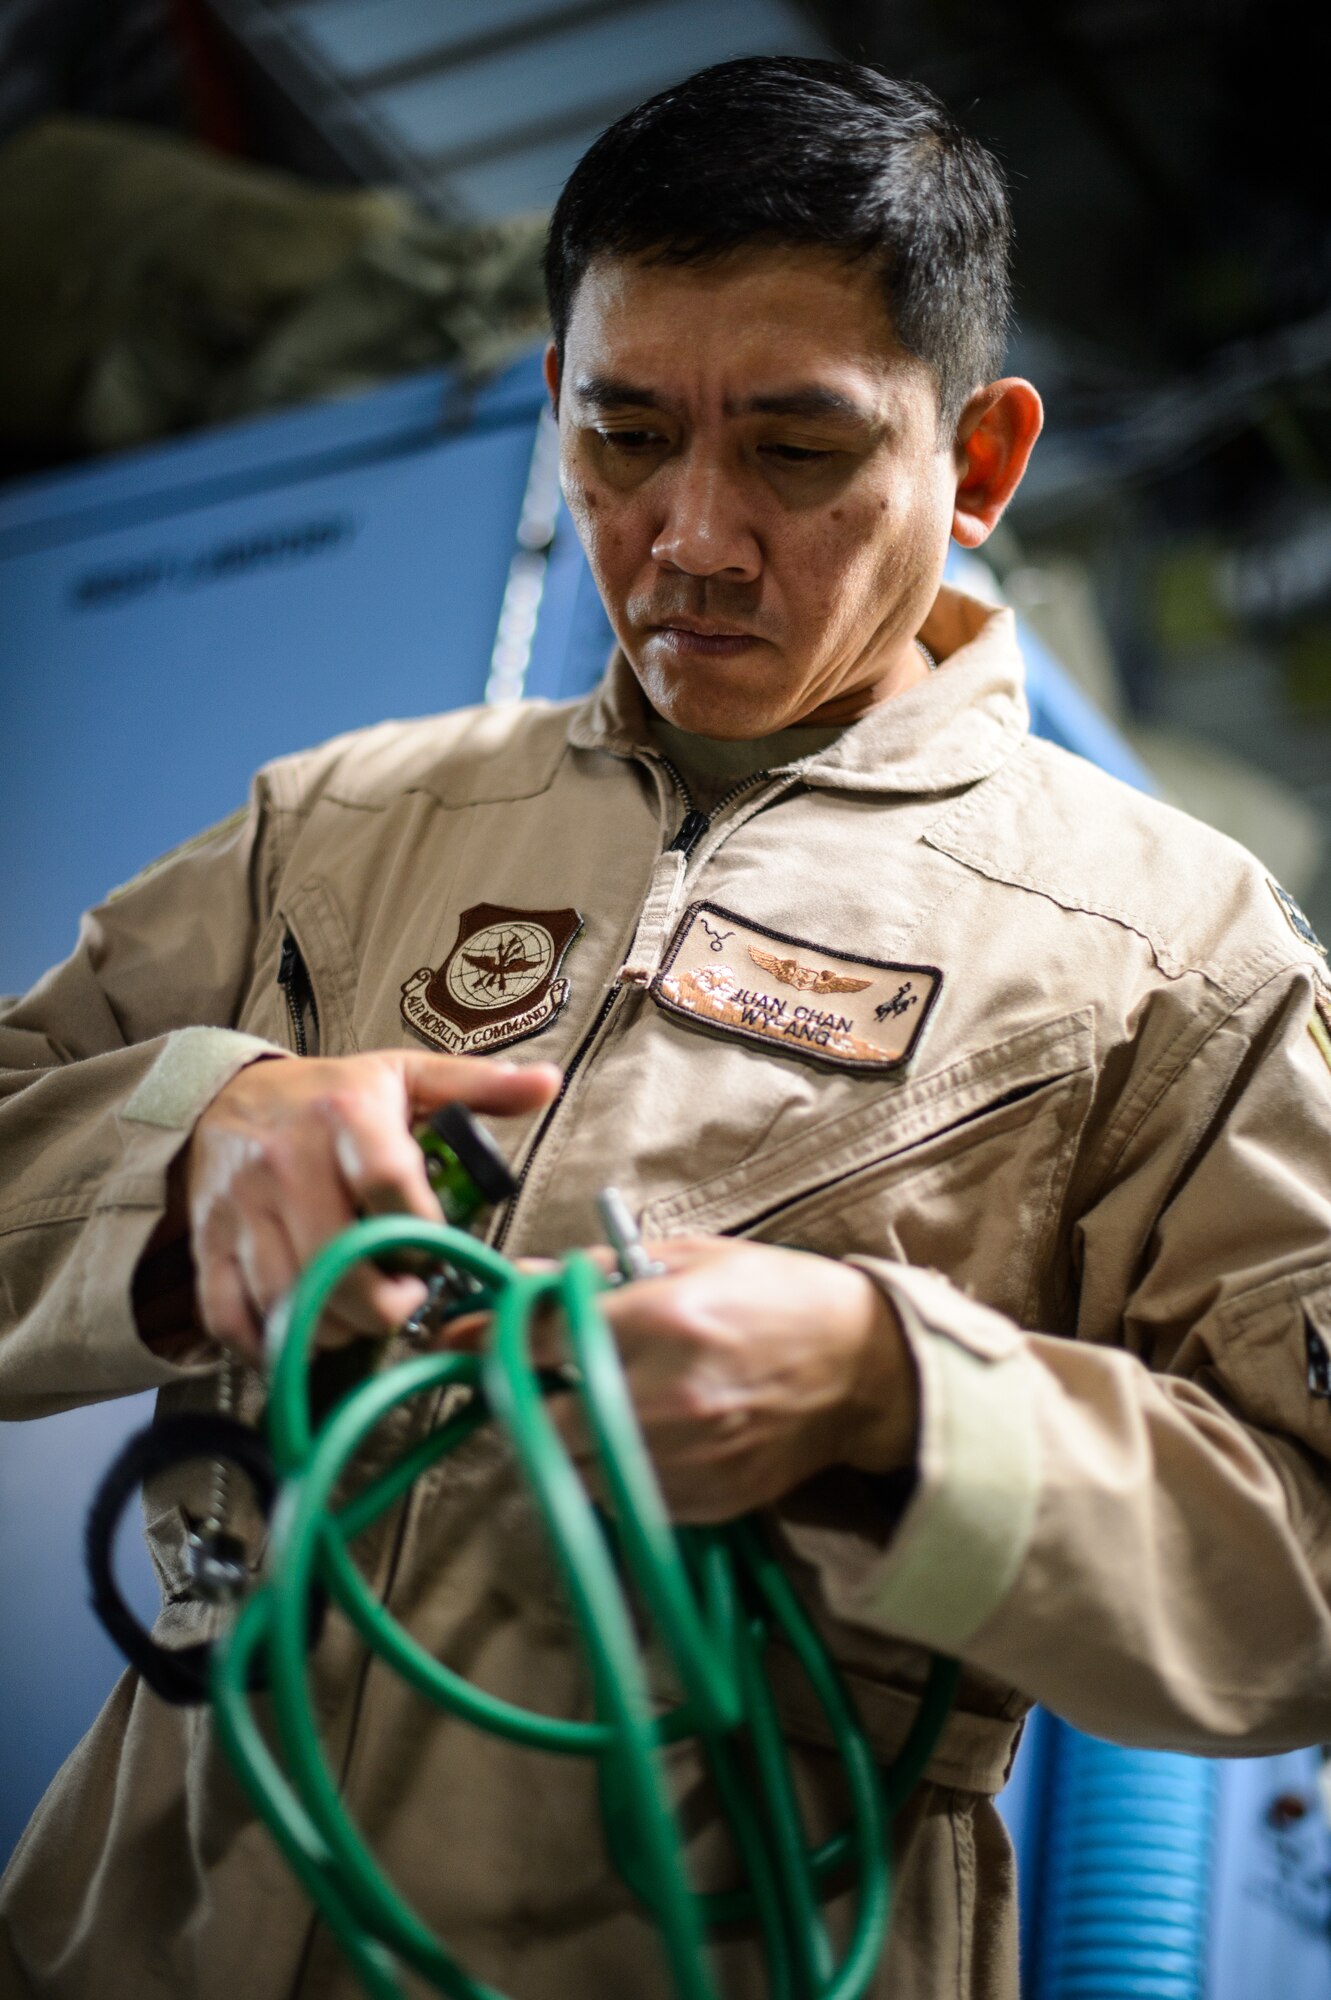 Capt. Juan Chan, 10th Expeditionary Aeromedical Evacuation Flight nurse, conducts a pre-flight test on medical equipment Nov. 10, 2015, at Ramstein Air Base, Germany. After configuring the inside of the C-17 Globemaster III into a flying ambulance, the Airmen test their equipment to ensure they can provide the best possible treatment while flying thousands of feet in the air. The 10th EAEF is a mixture of active-duty, reserve and guard Airmen deployed to Ramstein, constantly flying to war zones to retrieve patients needing higher levels of medical care. (U.S. Air Force photo/Staff Sgt. Armando A. Schwier-Morales)